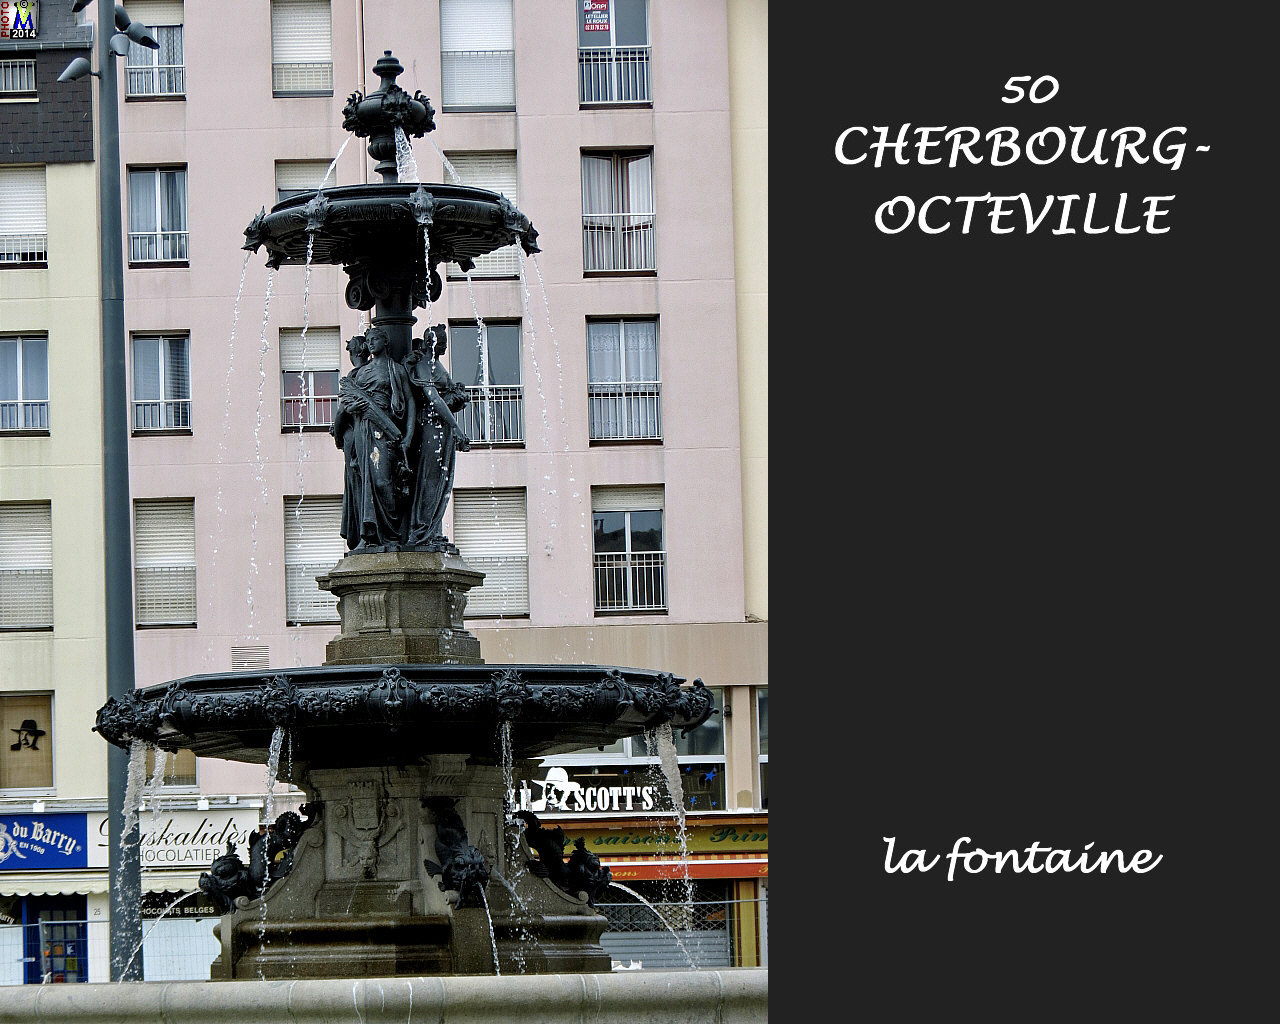 50CHERBOURG_fontaine_100.jpg